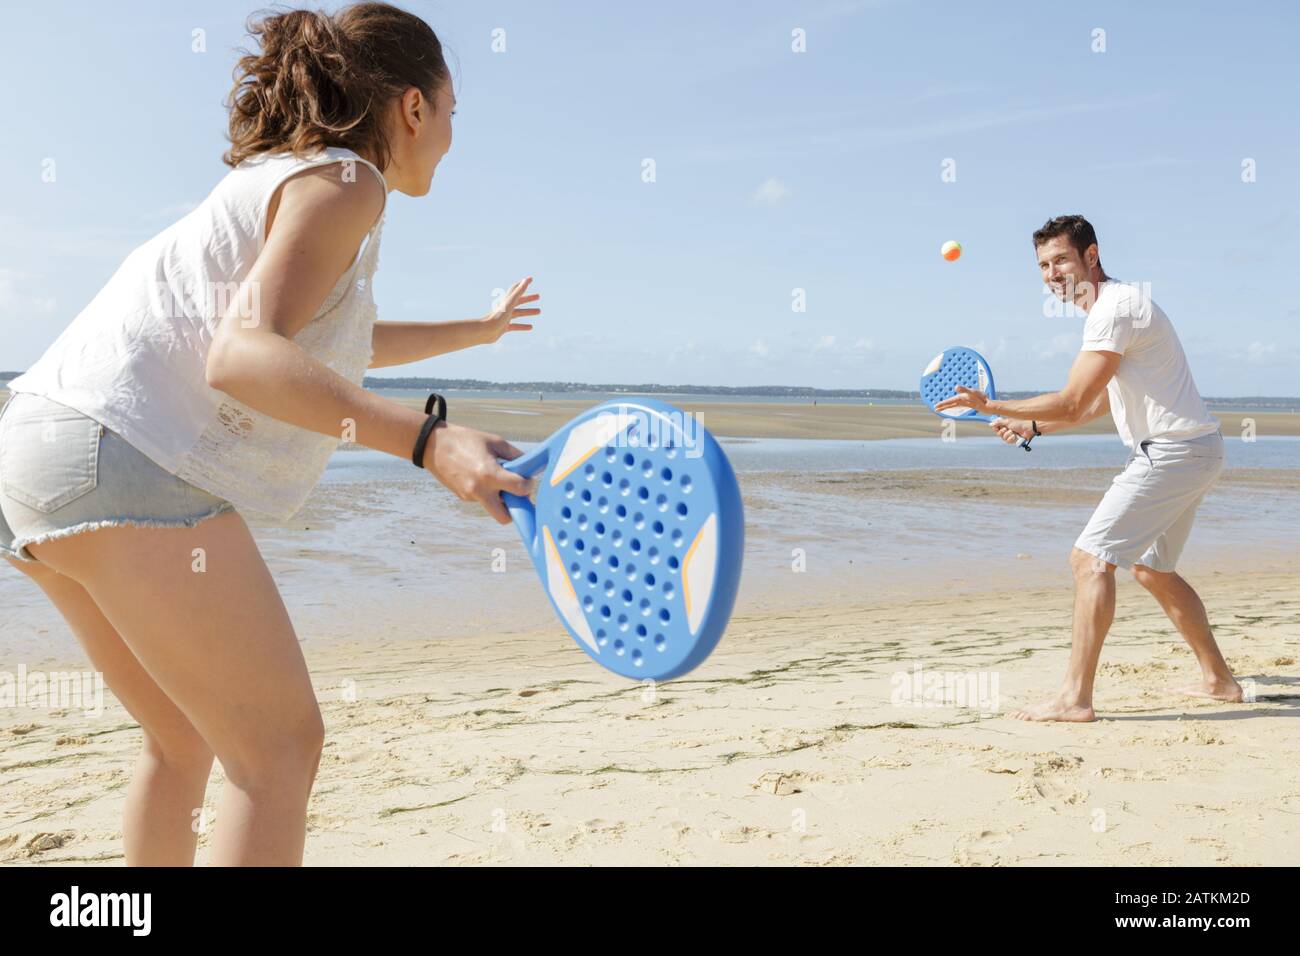 couple playing beach tennis game on the sand Stock Photo - Alamy